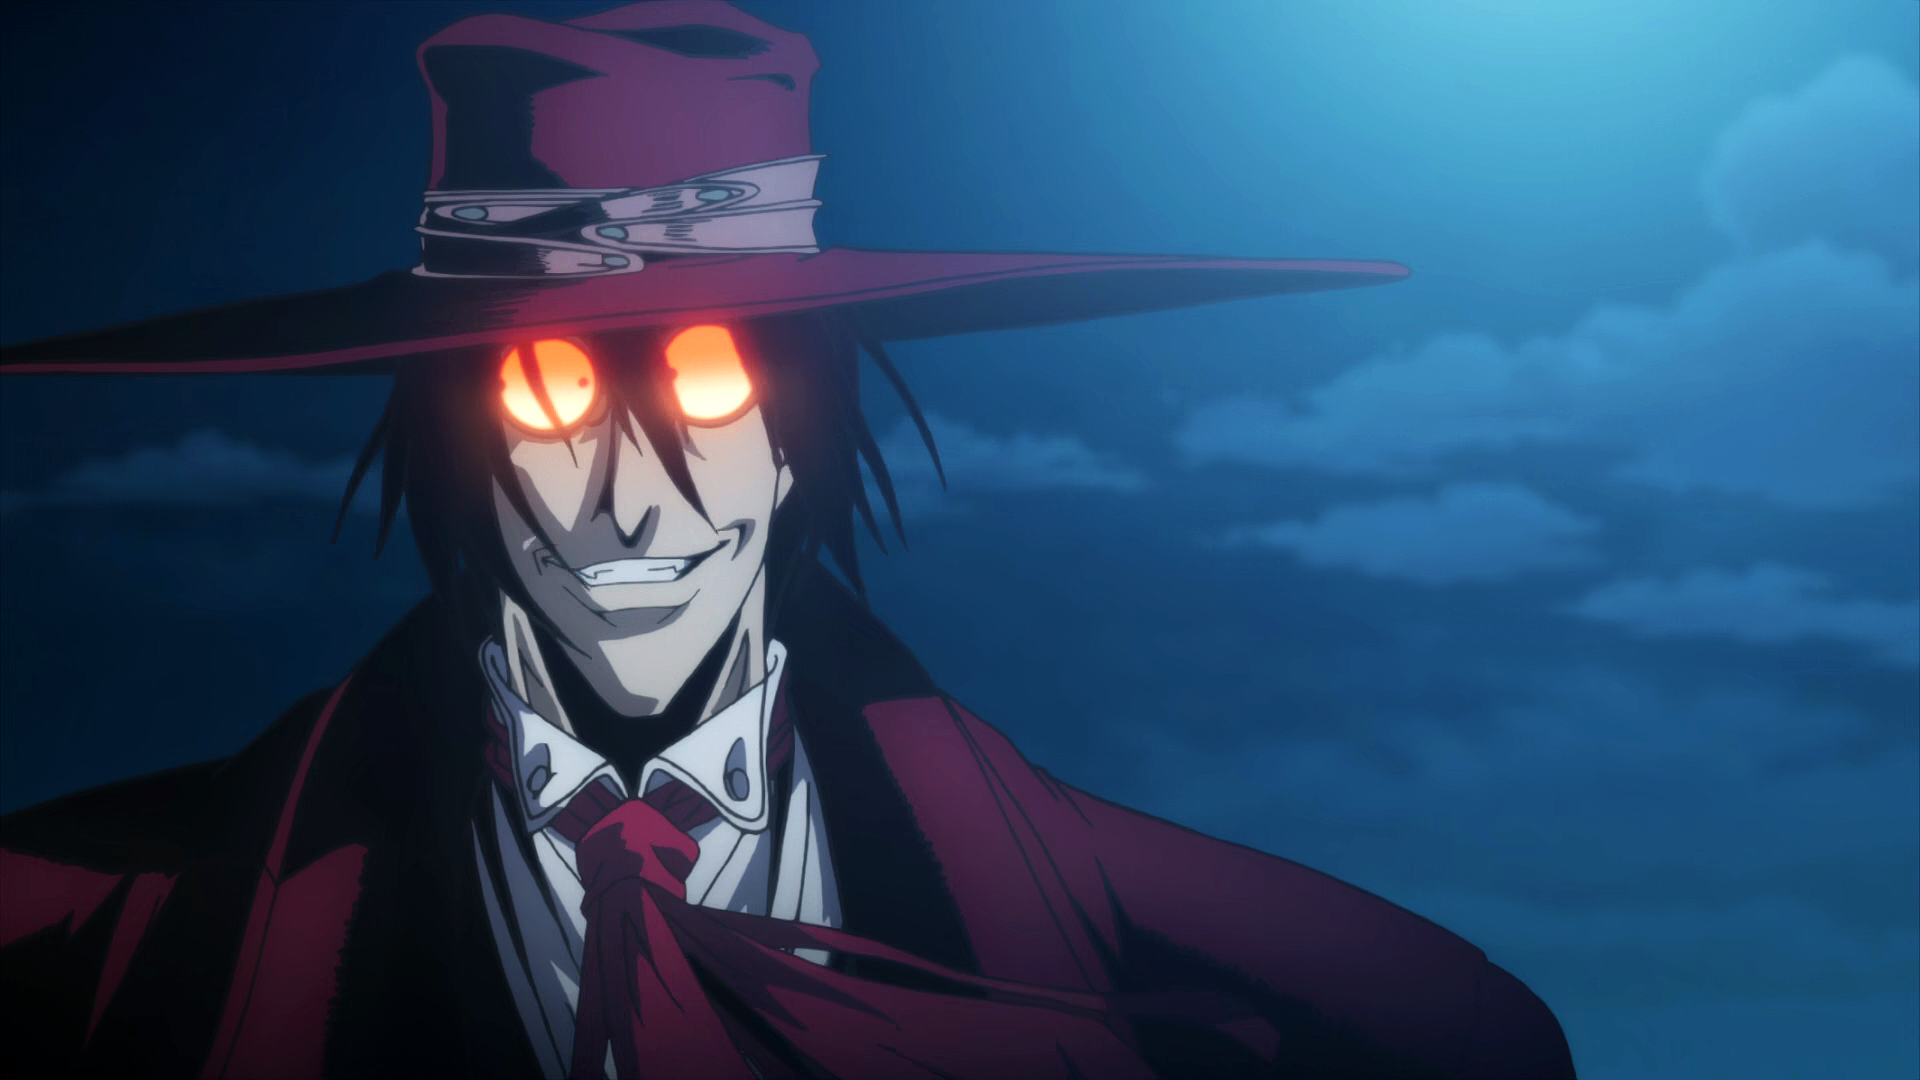 Hellsing: 10 Things You Didn't Know About The Franchise